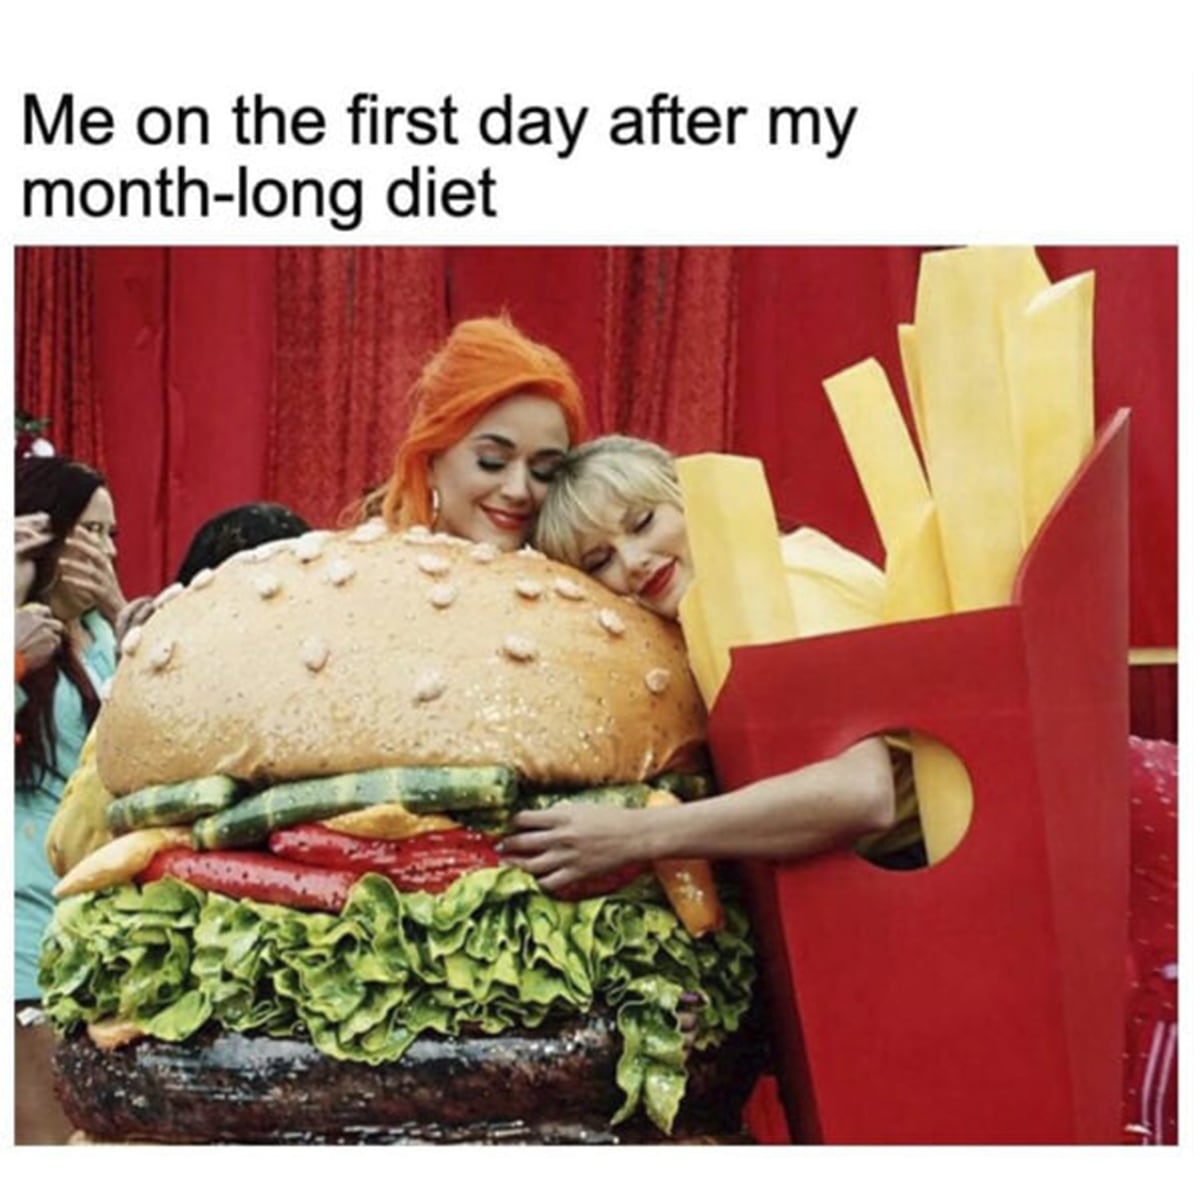 Me on the first day after my month-long diet.